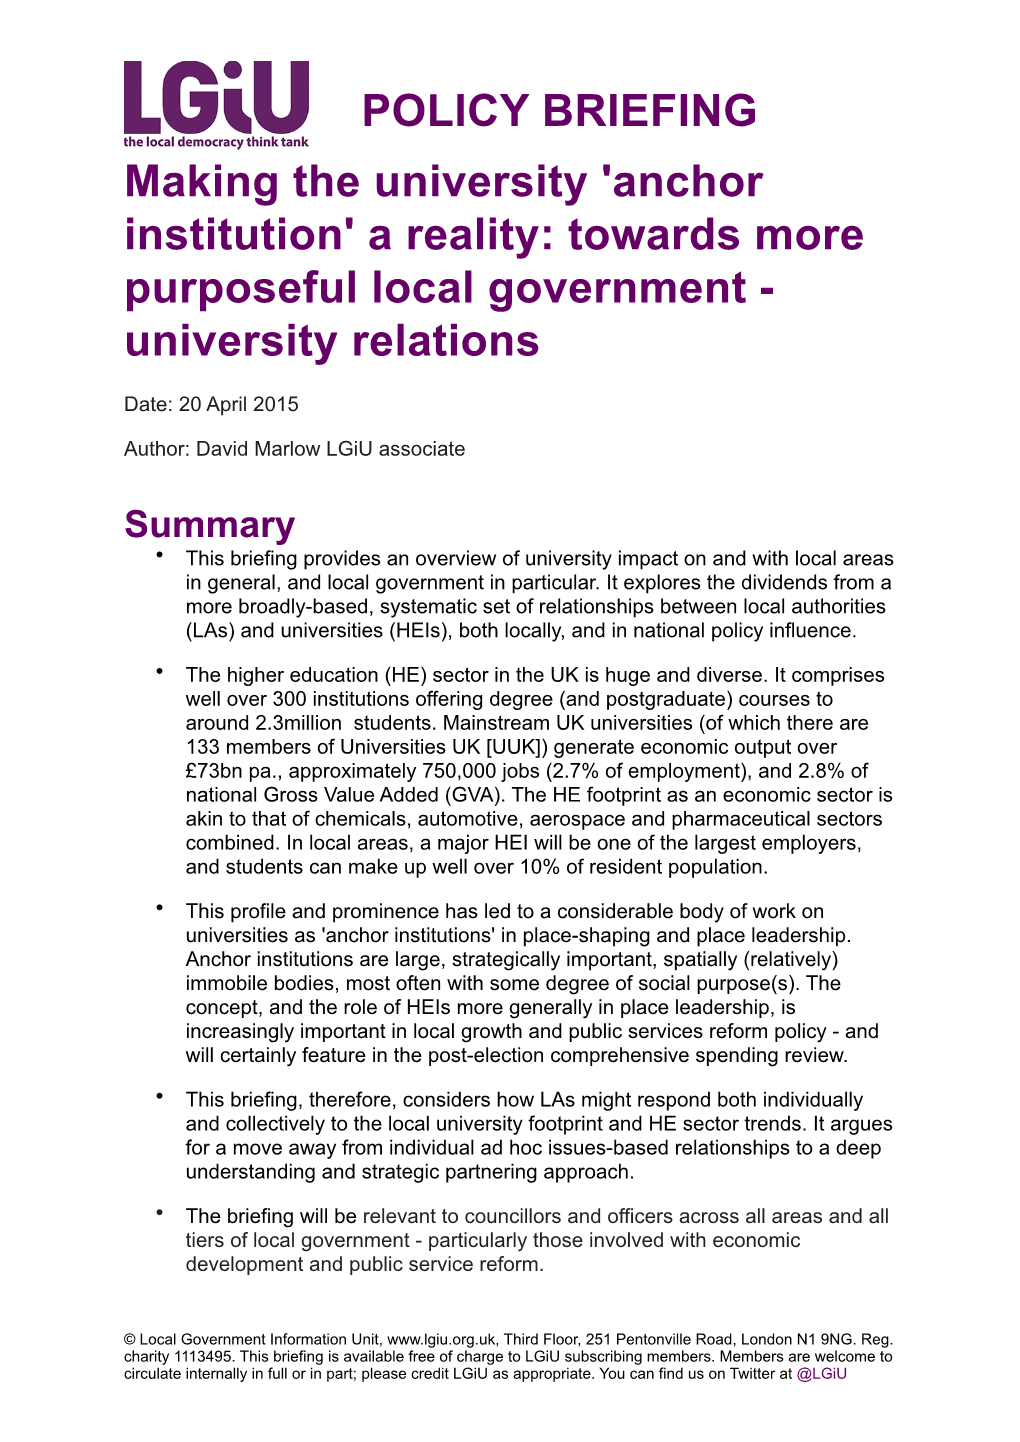 Anchor Institution' a Reality: Towards More Purposeful Local Government - University Relations